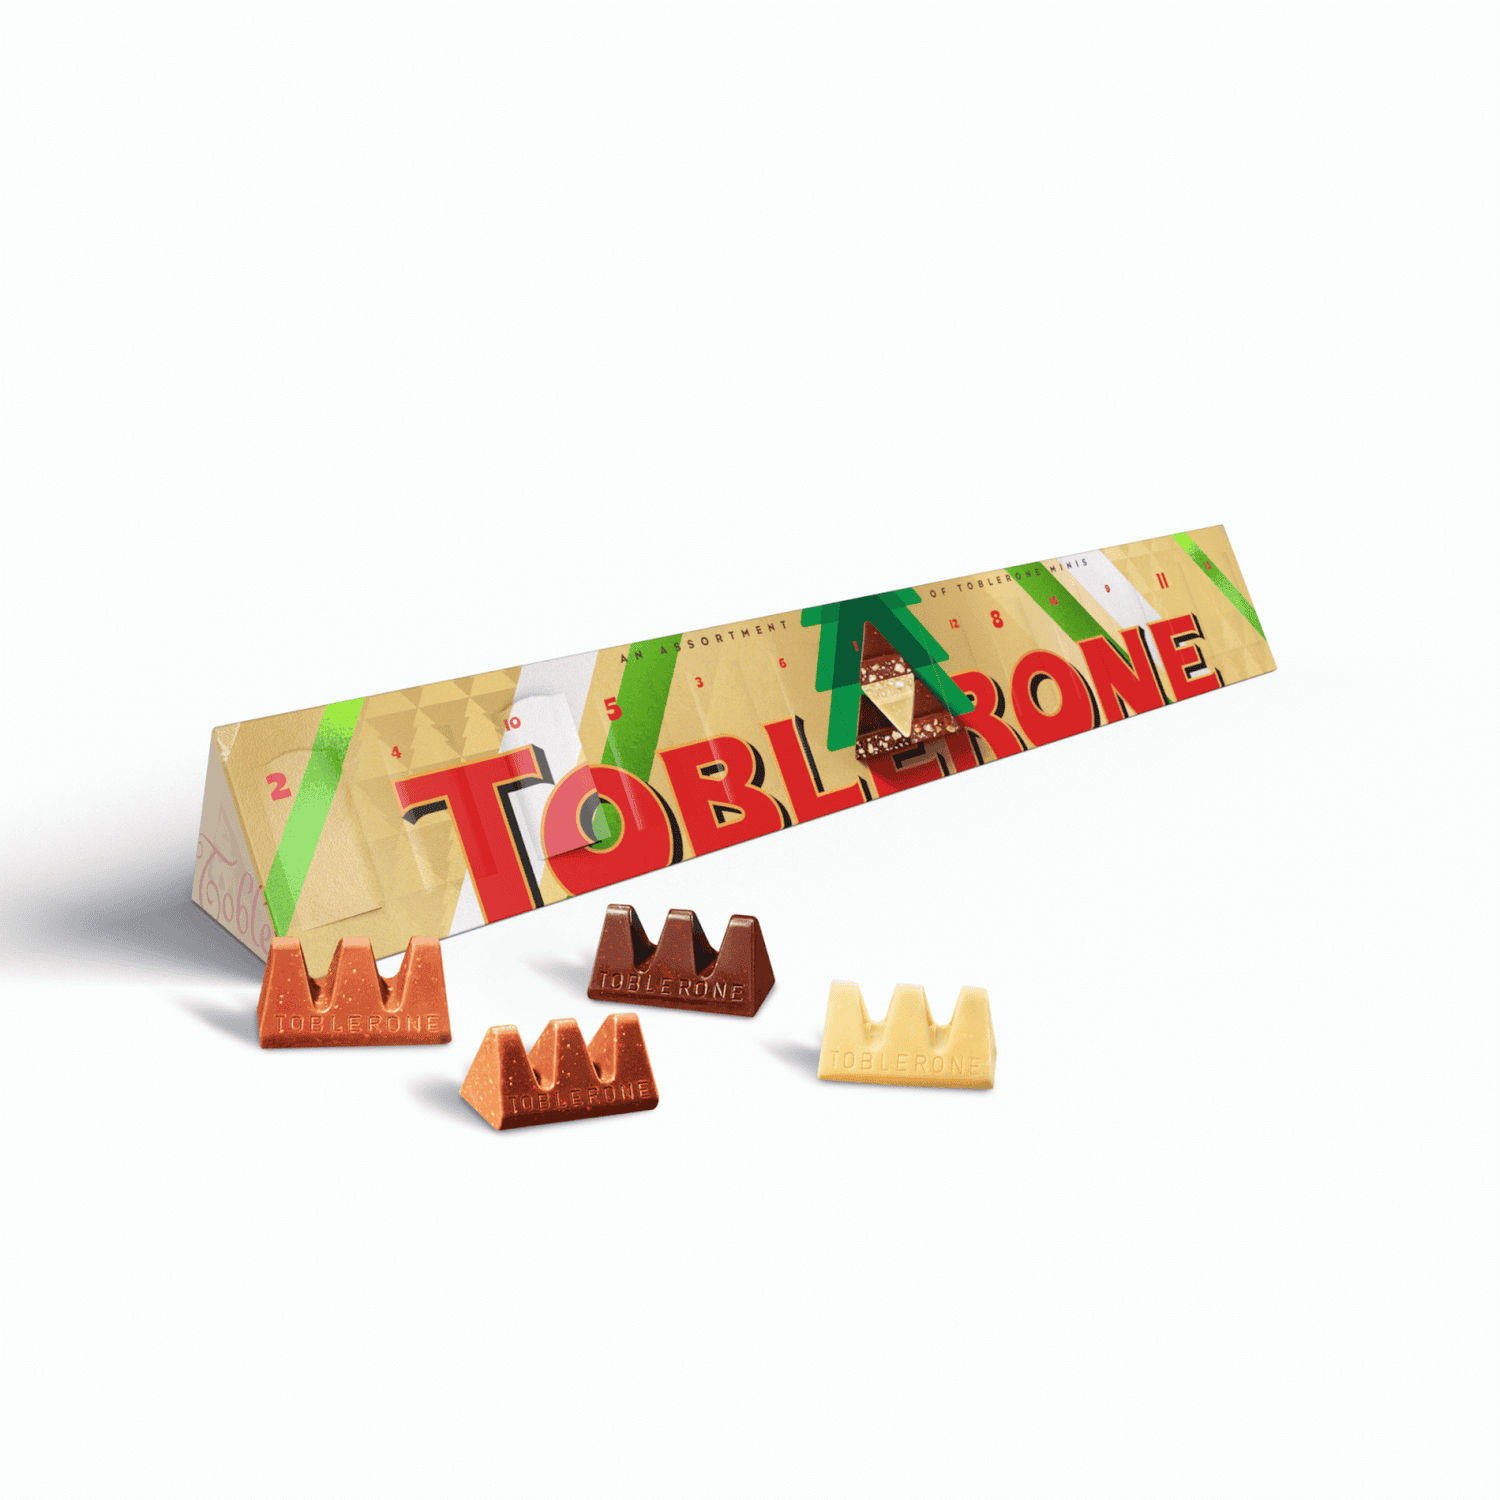 First Toblerone bars without the iconic logo have gone on sale